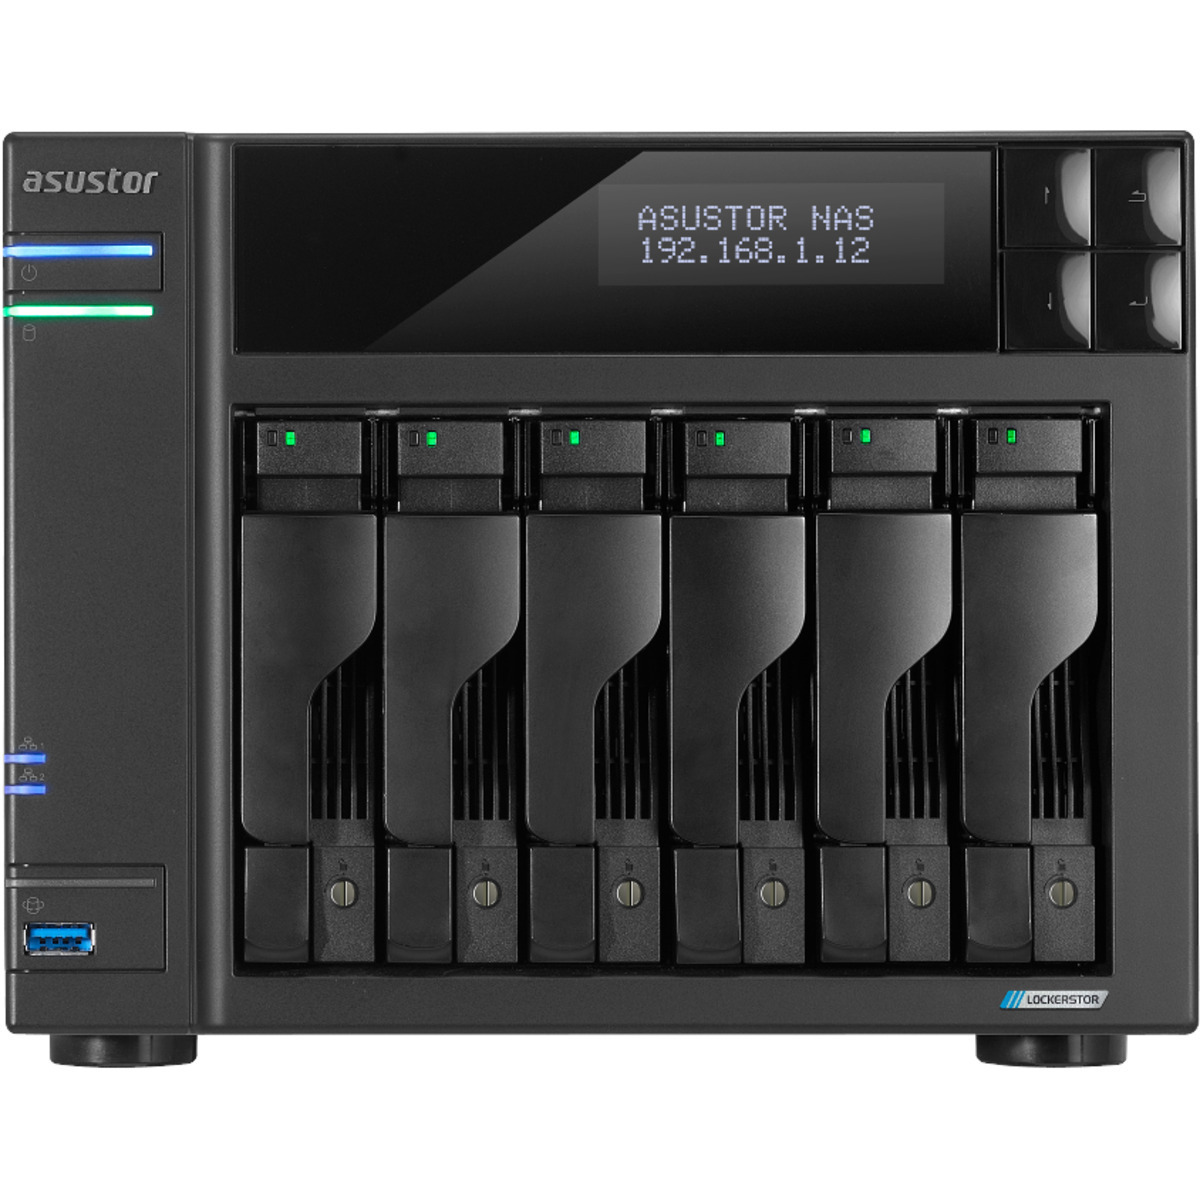 ASUSTOR LOCKERSTOR 6 Gen2 AS6706T 12tb 6-Bay Desktop Multimedia / Power User / Business NAS - Network Attached Storage Device 3x4tb Seagate IronWolf Pro ST4000NE001 3.5 7200rpm SATA 6Gb/s HDD NAS Class Drives Installed - Burn-In Tested - FREE RAM UPGRADE LOCKERSTOR 6 Gen2 AS6706T